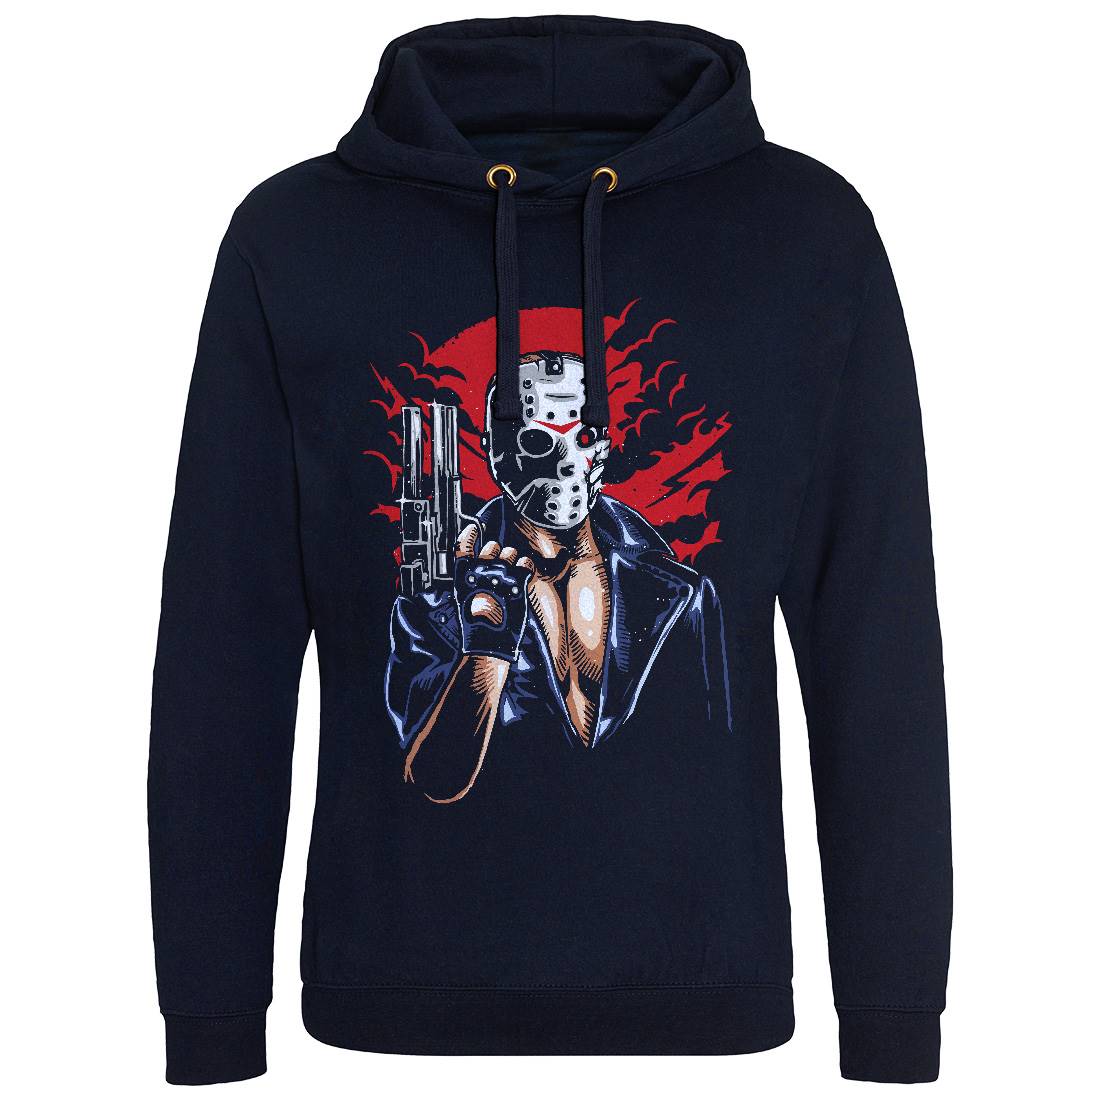 Jason Mens Hoodie Without Pocket Horror A548